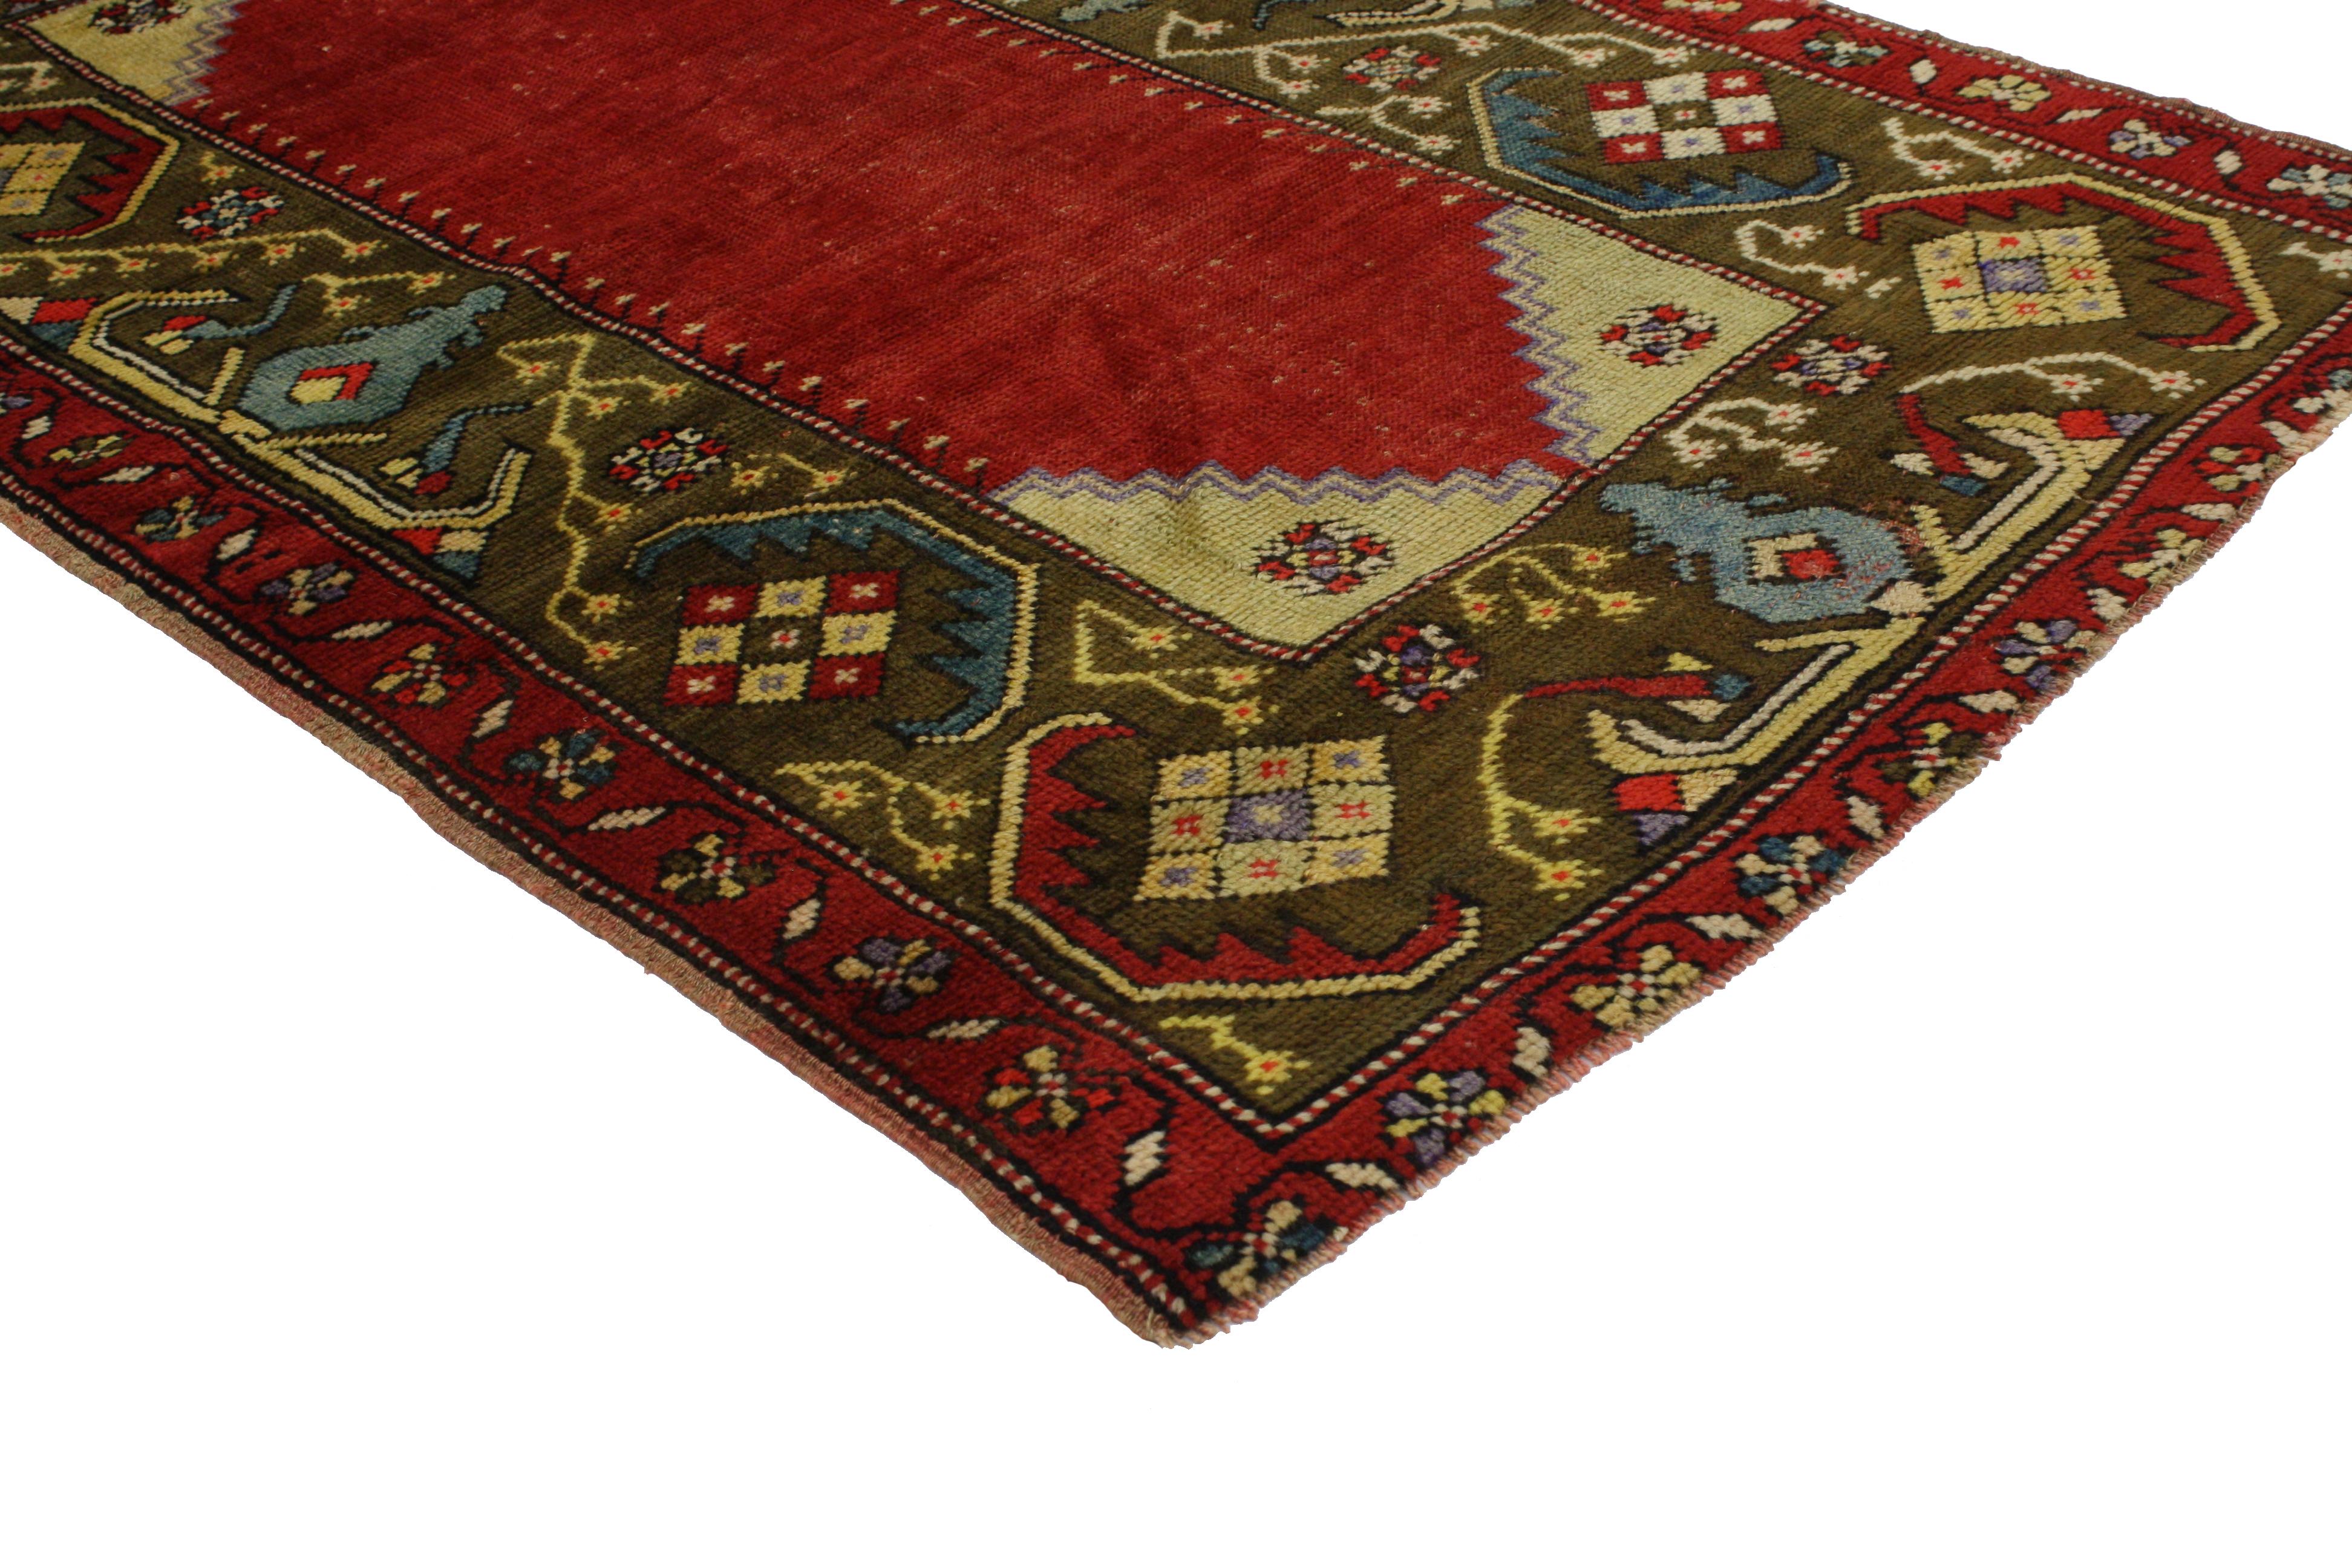 51684, vintage Turkish Oushak Accent rug, entry or foyer rug. This vintage Turkish Oushak rug features a modern traditional style. Immersed in Anatolian history and refined colors, this vintage Oushak rug combines simplicity with sophistication.